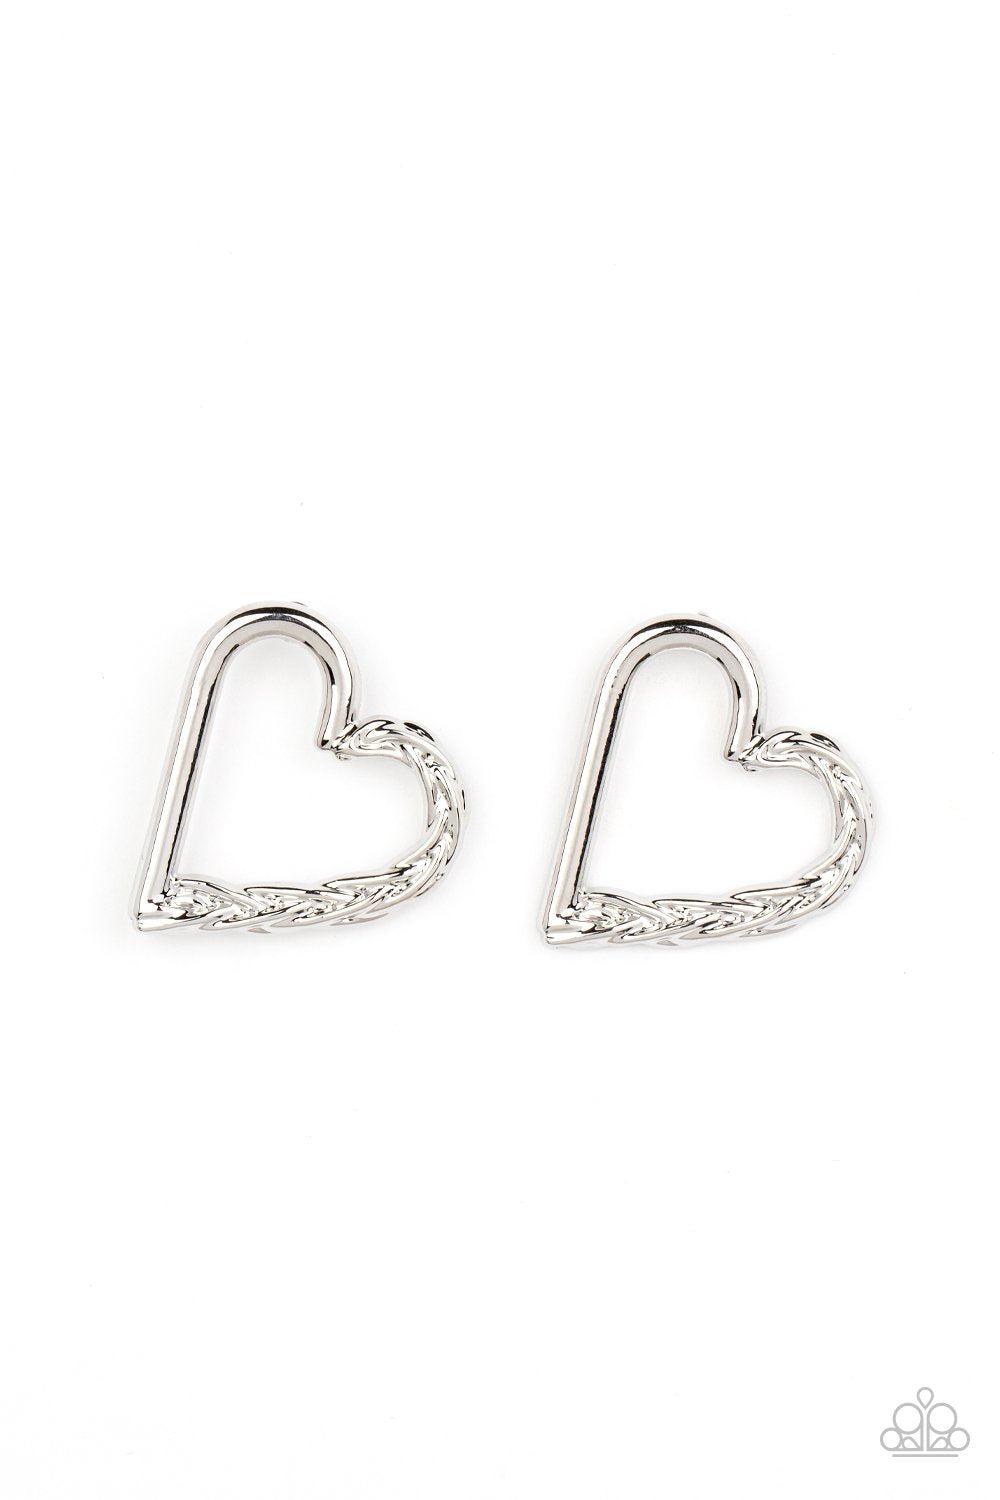 Cupid, Who? Silver Heart Earrings - Paparazzi Accessories- lightbox - CarasShop.com - $5 Jewelry by Cara Jewels